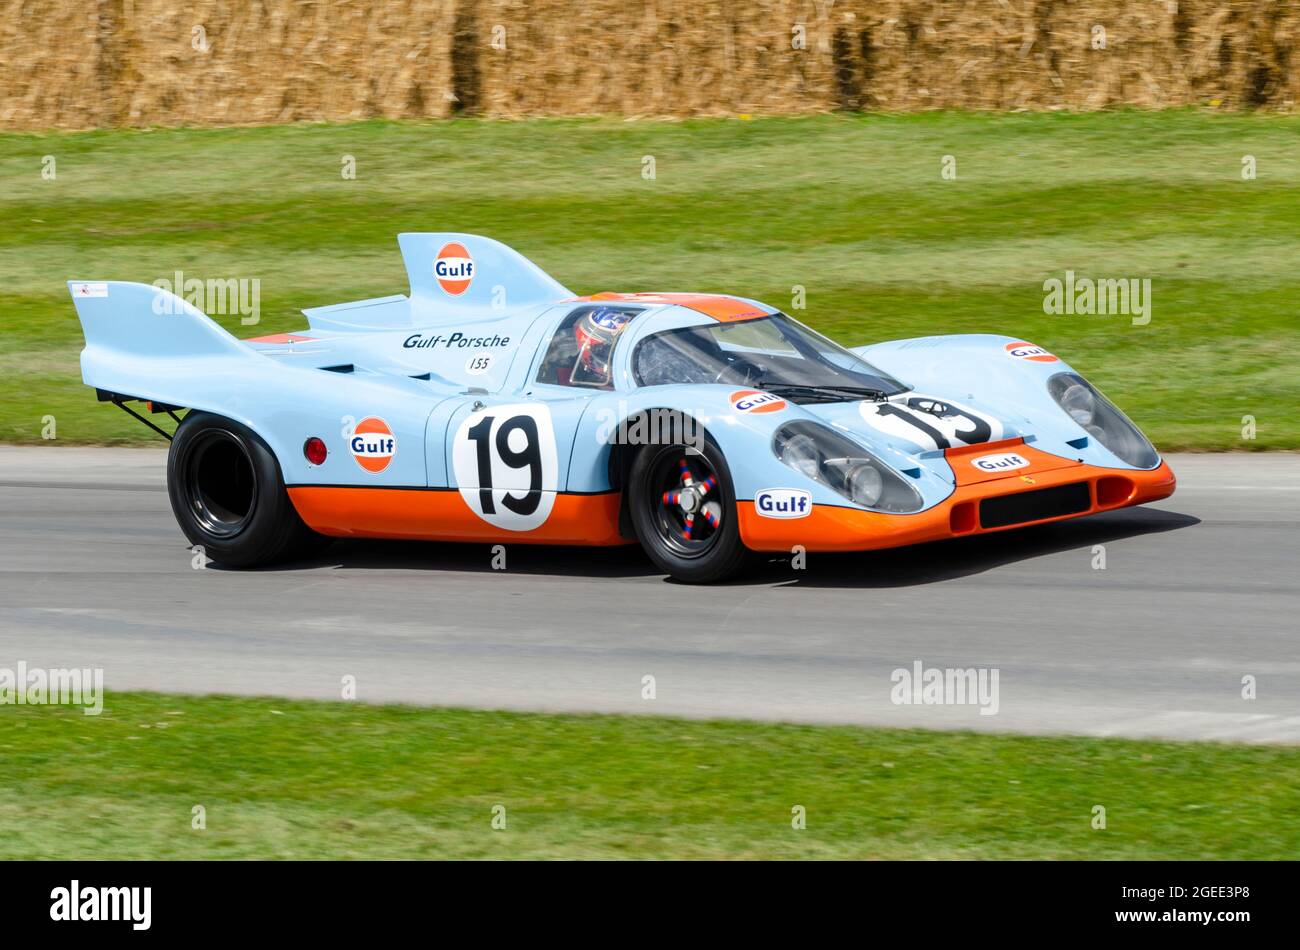 Porsche 917K racing car in classic Gulf Oils colour scheme driving up the hill climb track at the Goodwood Festival of Speed motor racing event 2014. Stock Photo